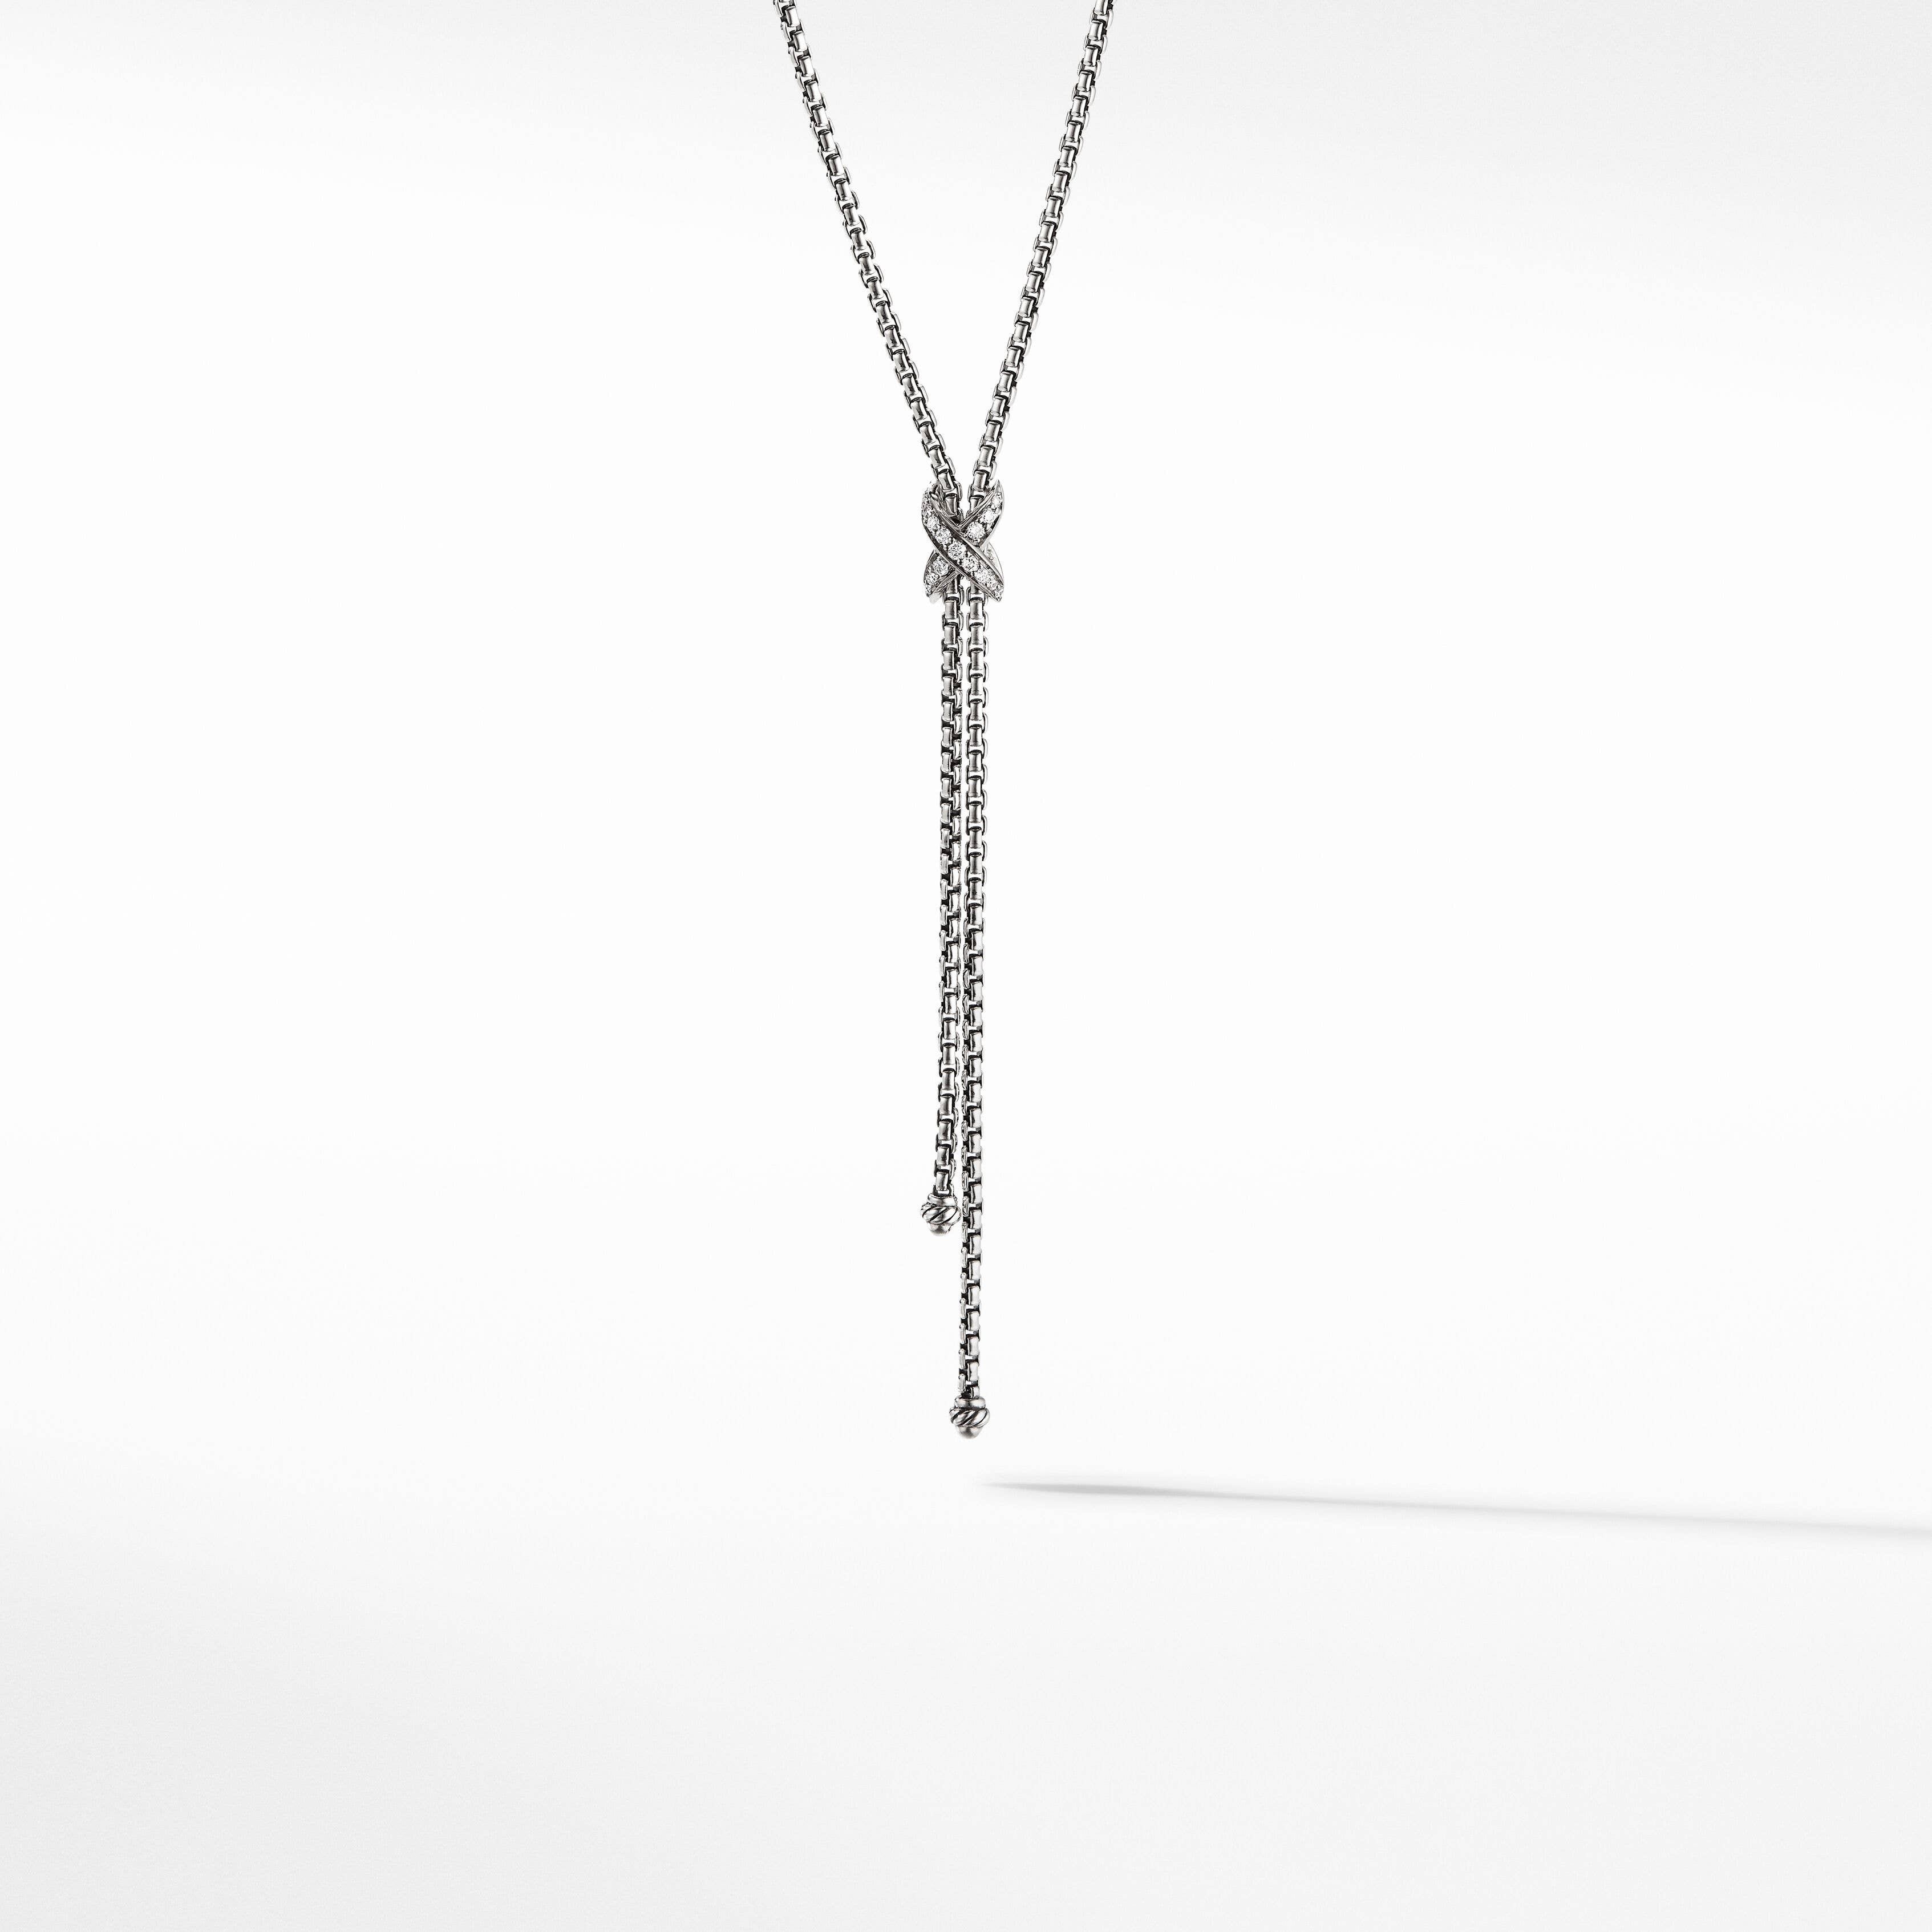 Petite X Lariat Necklace in Sterling Silver with Pavé Diamonds